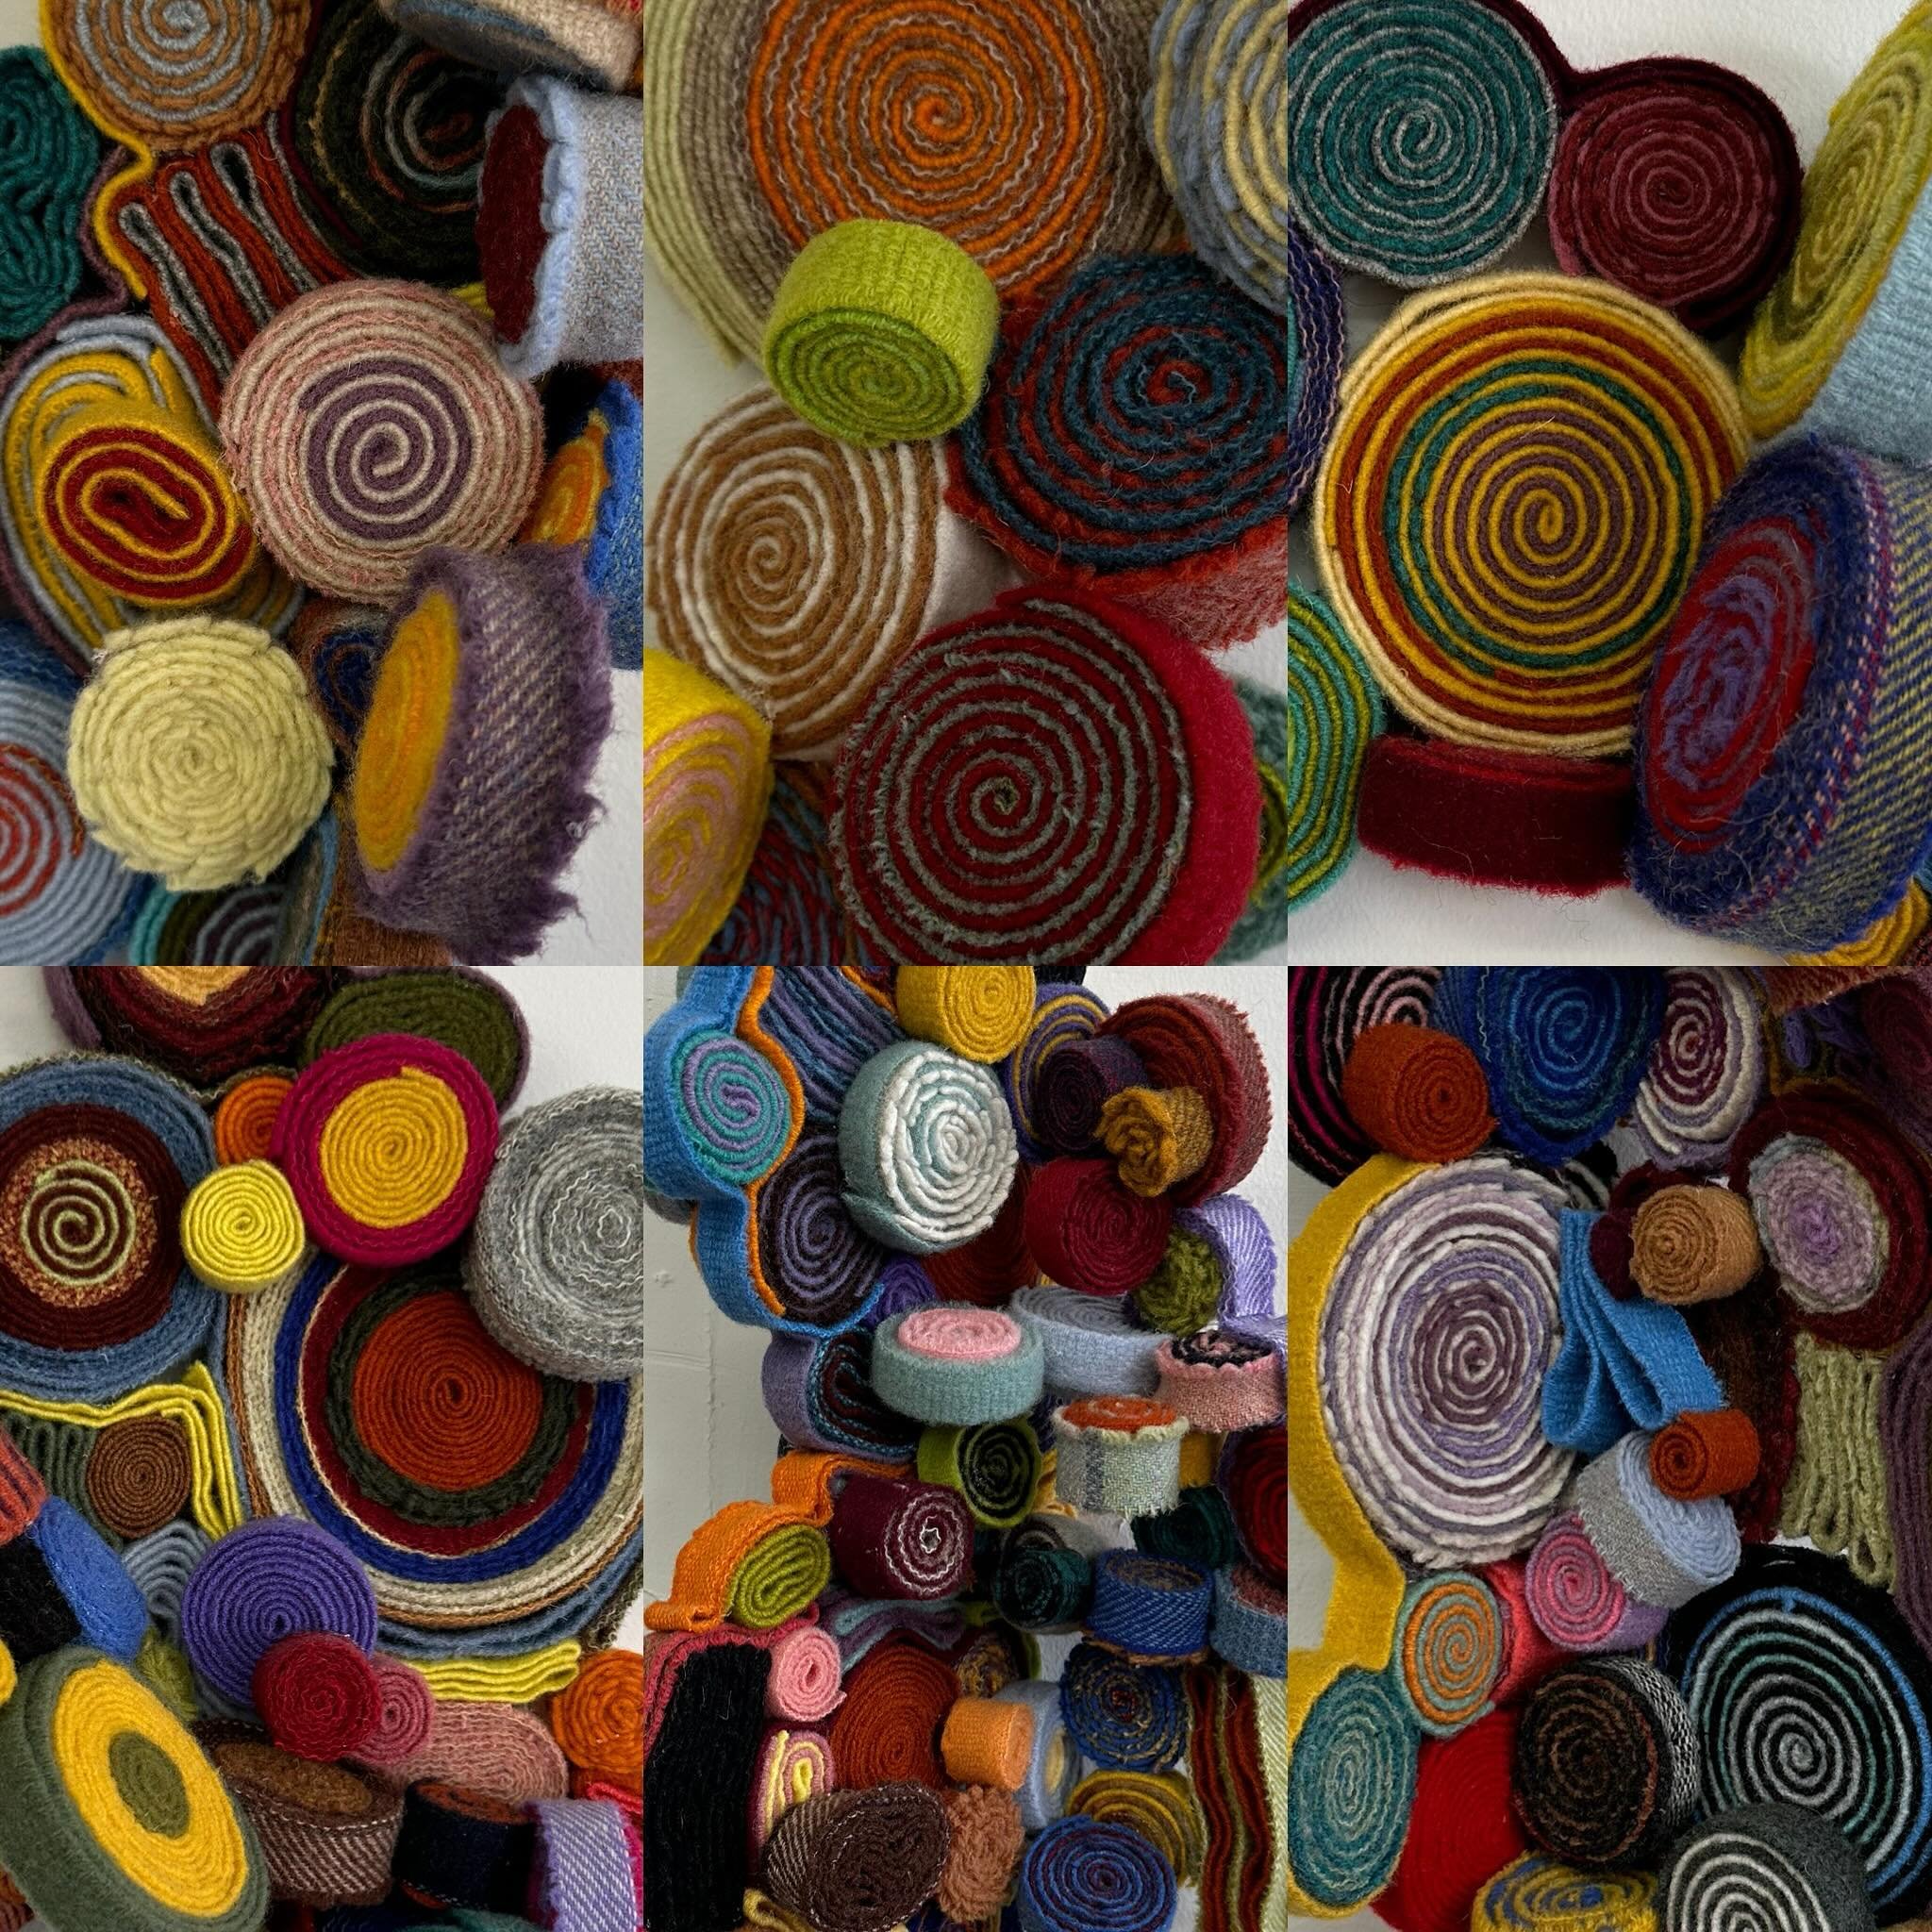 Look around and see what you can make outta what this Earth Day 🌎🌲🍃 #woolart #wool #recycledart #selvedge #fiberart #fiberartist #textileart #textileartist #fabricsculpture